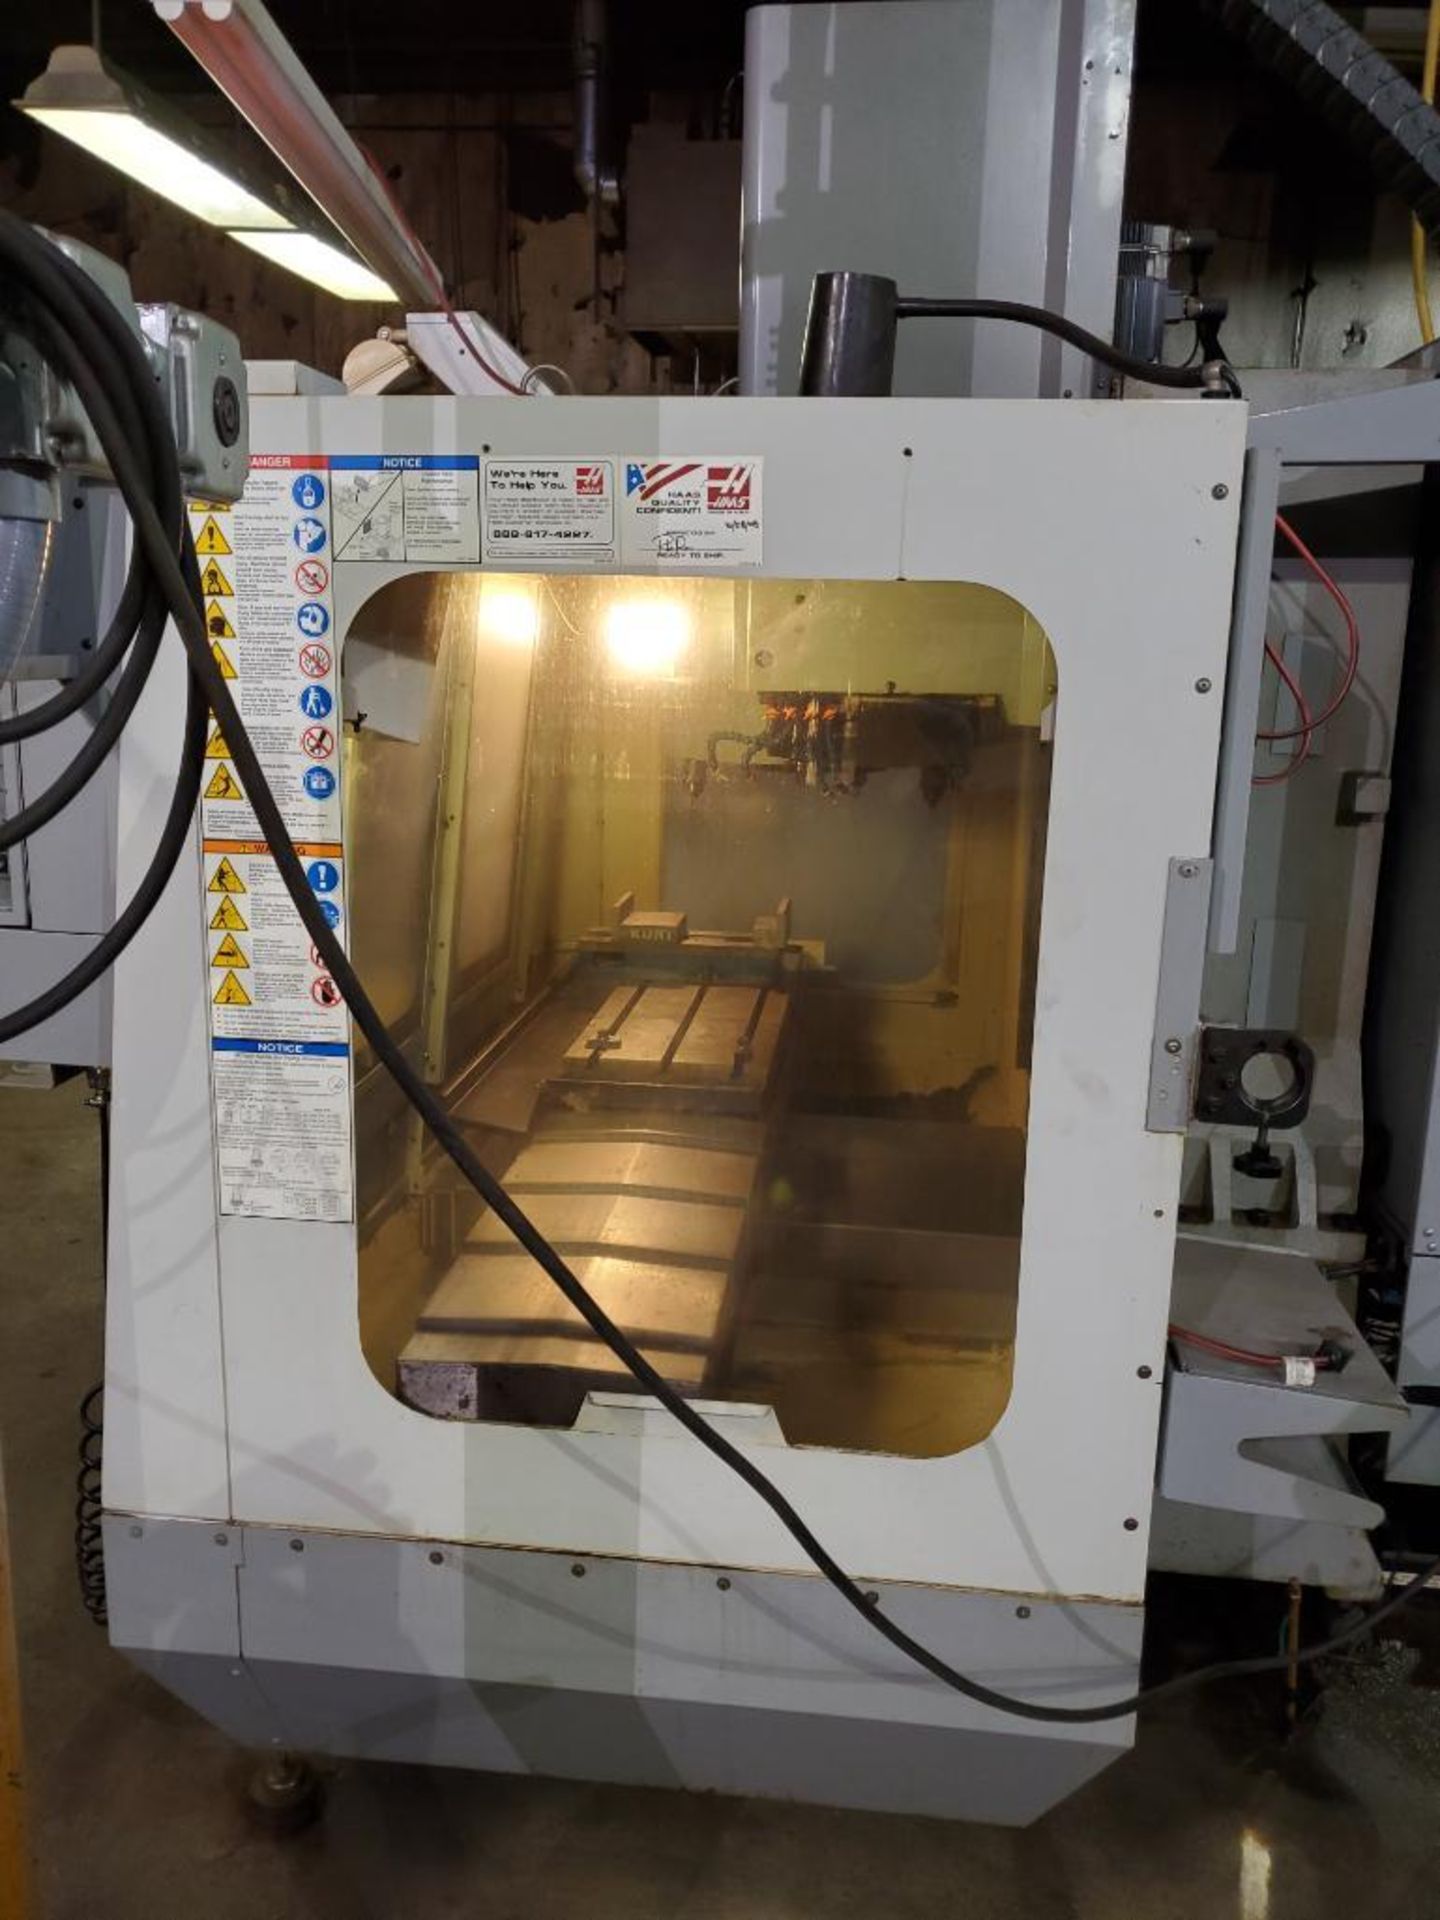 2008 HAAS VF-2D VERTICAL CNC MACHINING CENTER, S/N 1070960, 208/230V, 40 TAPER SPINDLE, 36" X 14" TA - Image 11 of 21